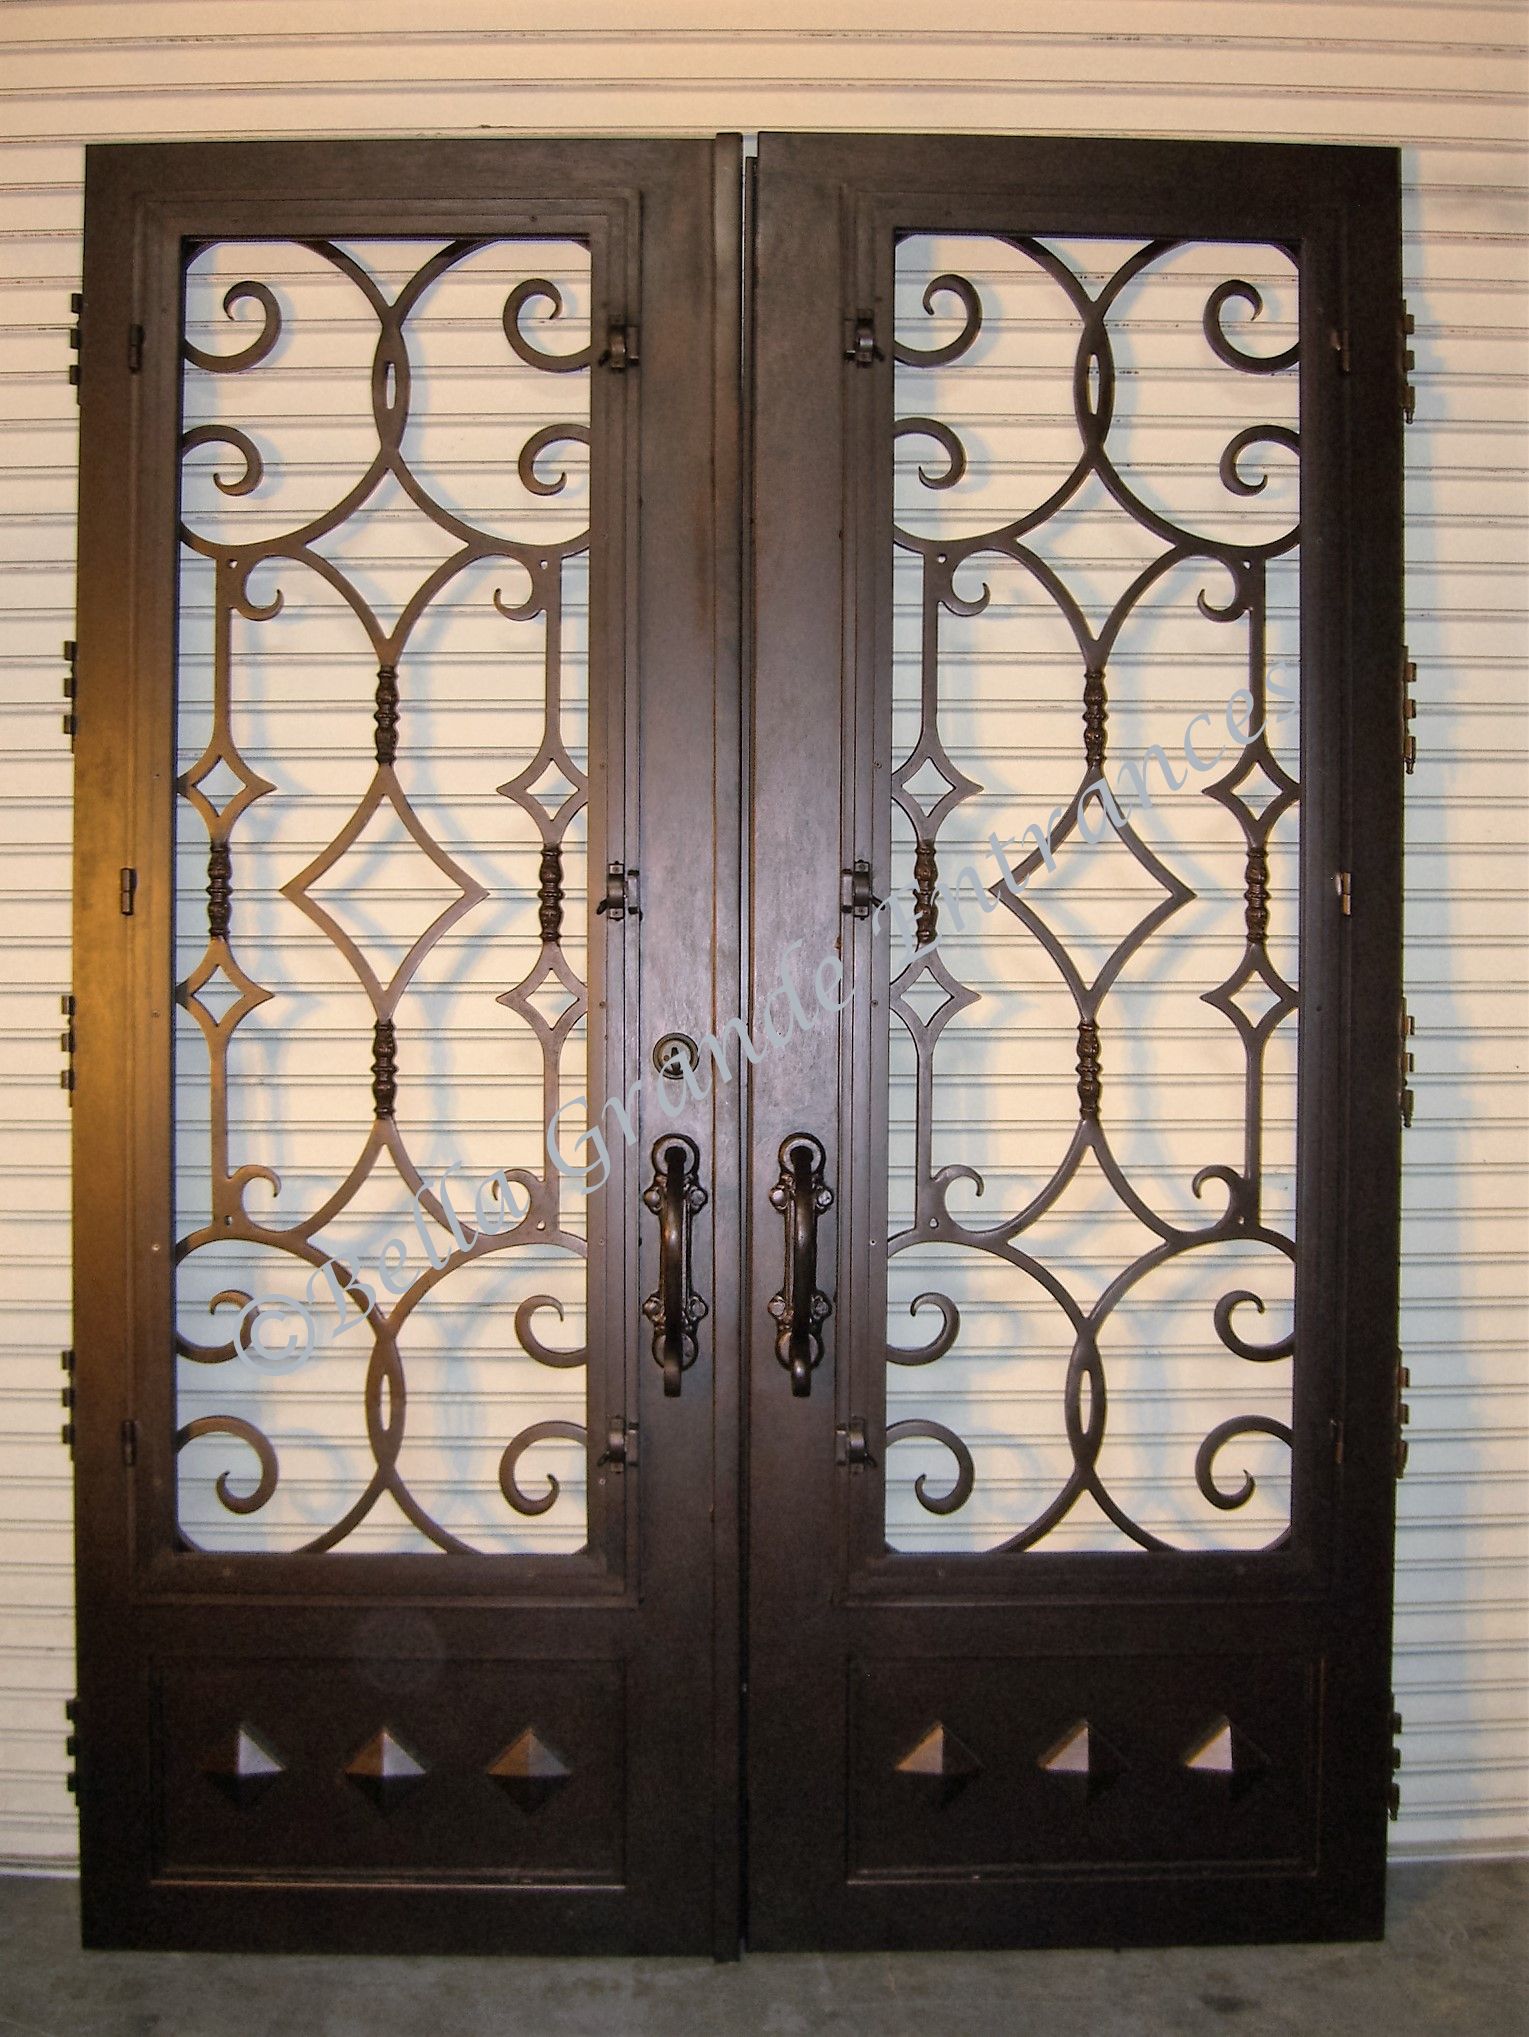 A stunning closeup of a beautifully crafted Double Iron Door, exclusively displayed at the showroom of Bella Grande Entrances in Las Vegas.